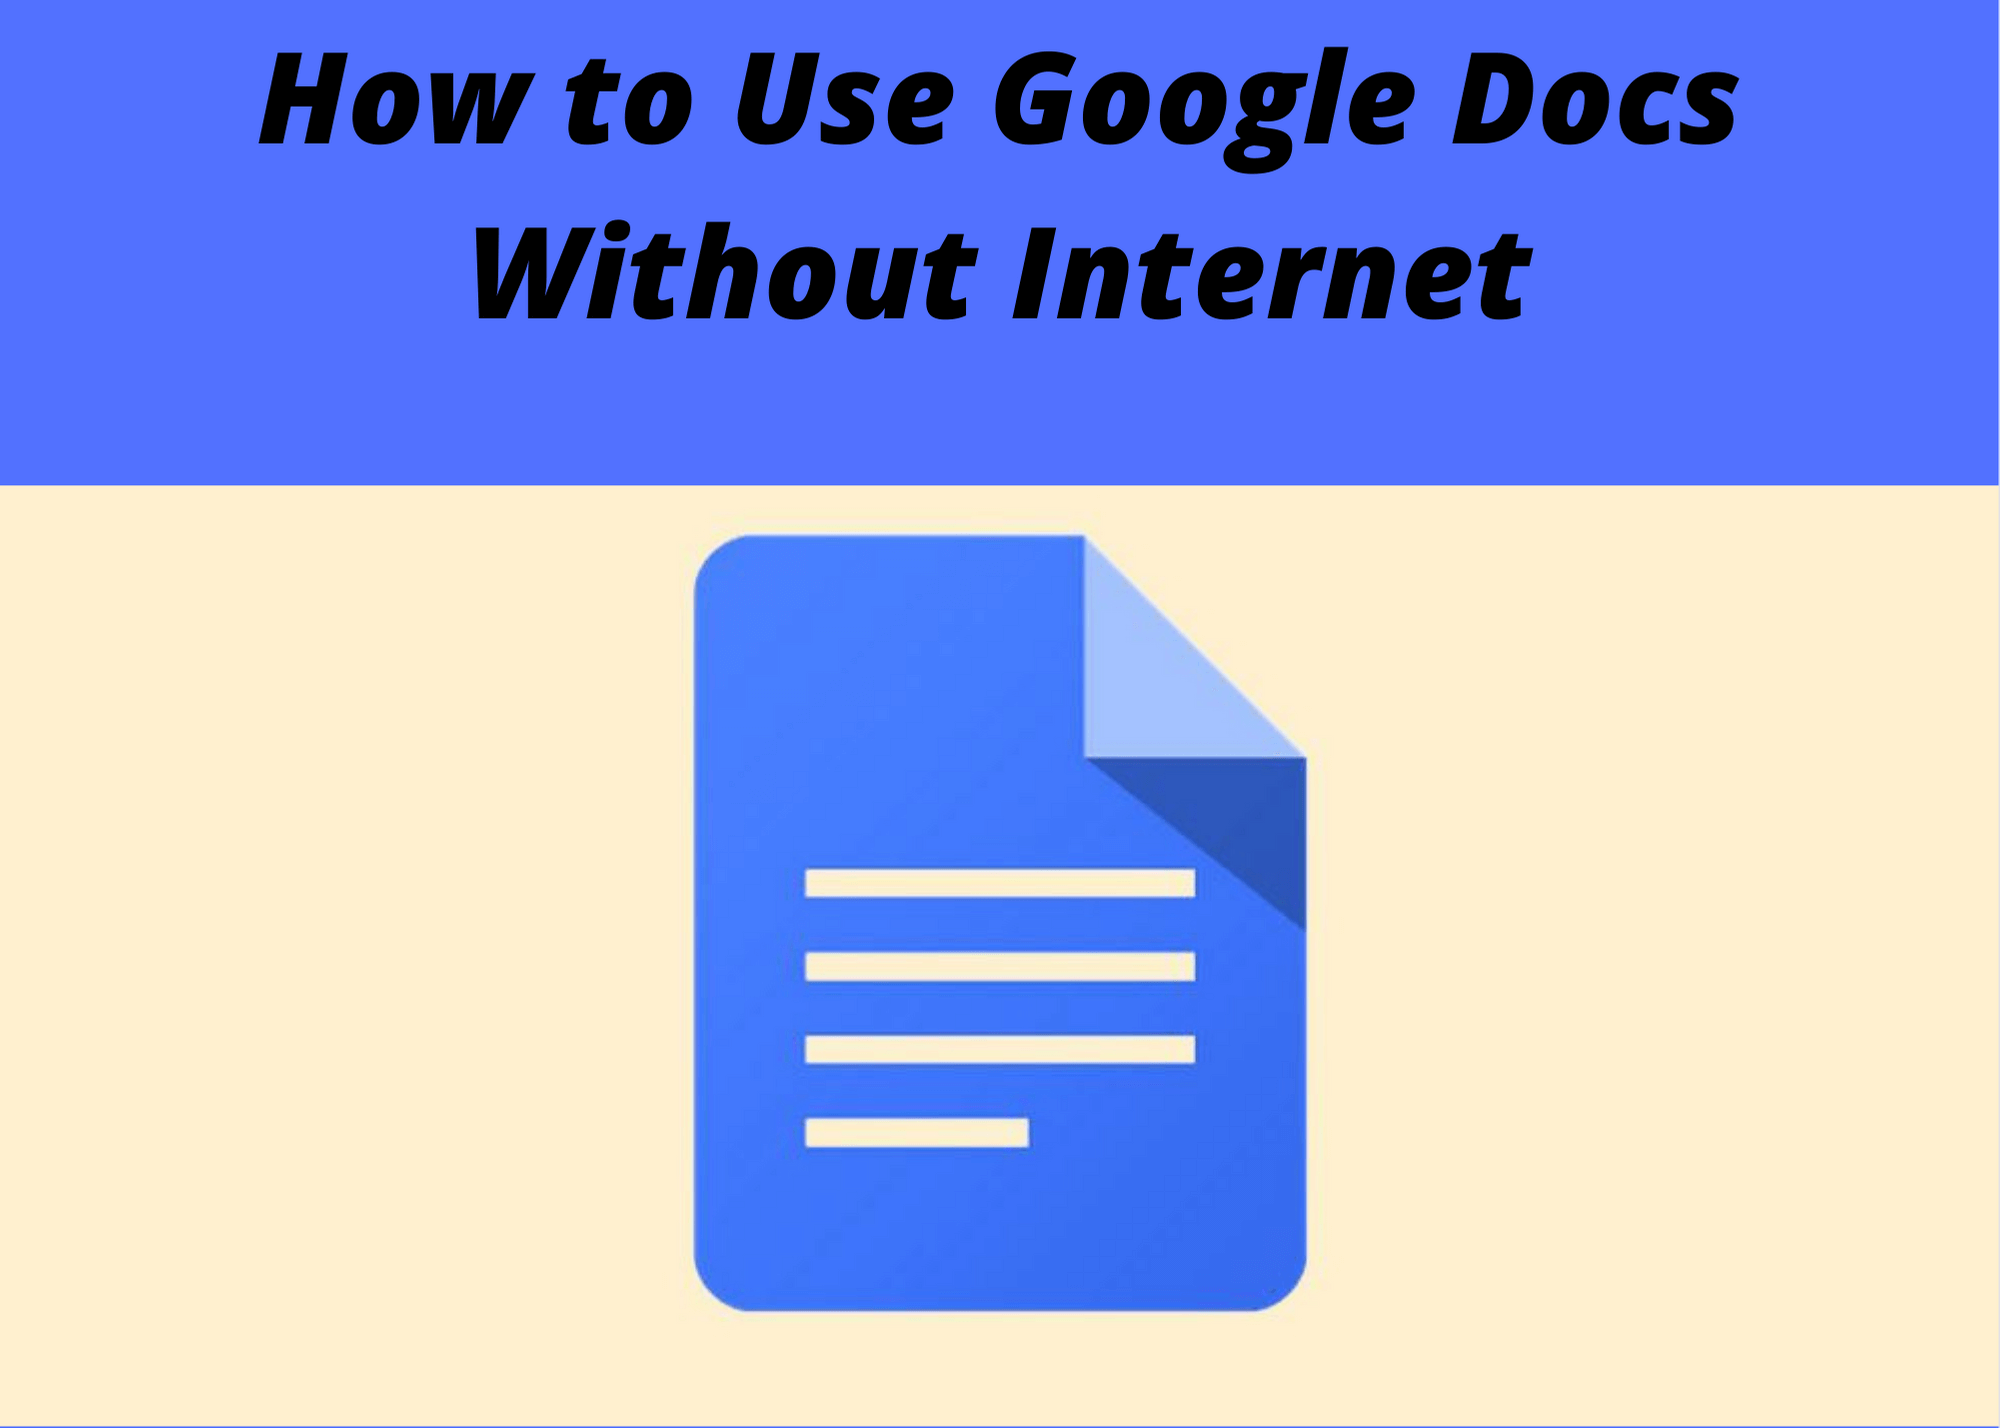 How to use Google Docs Without Internet